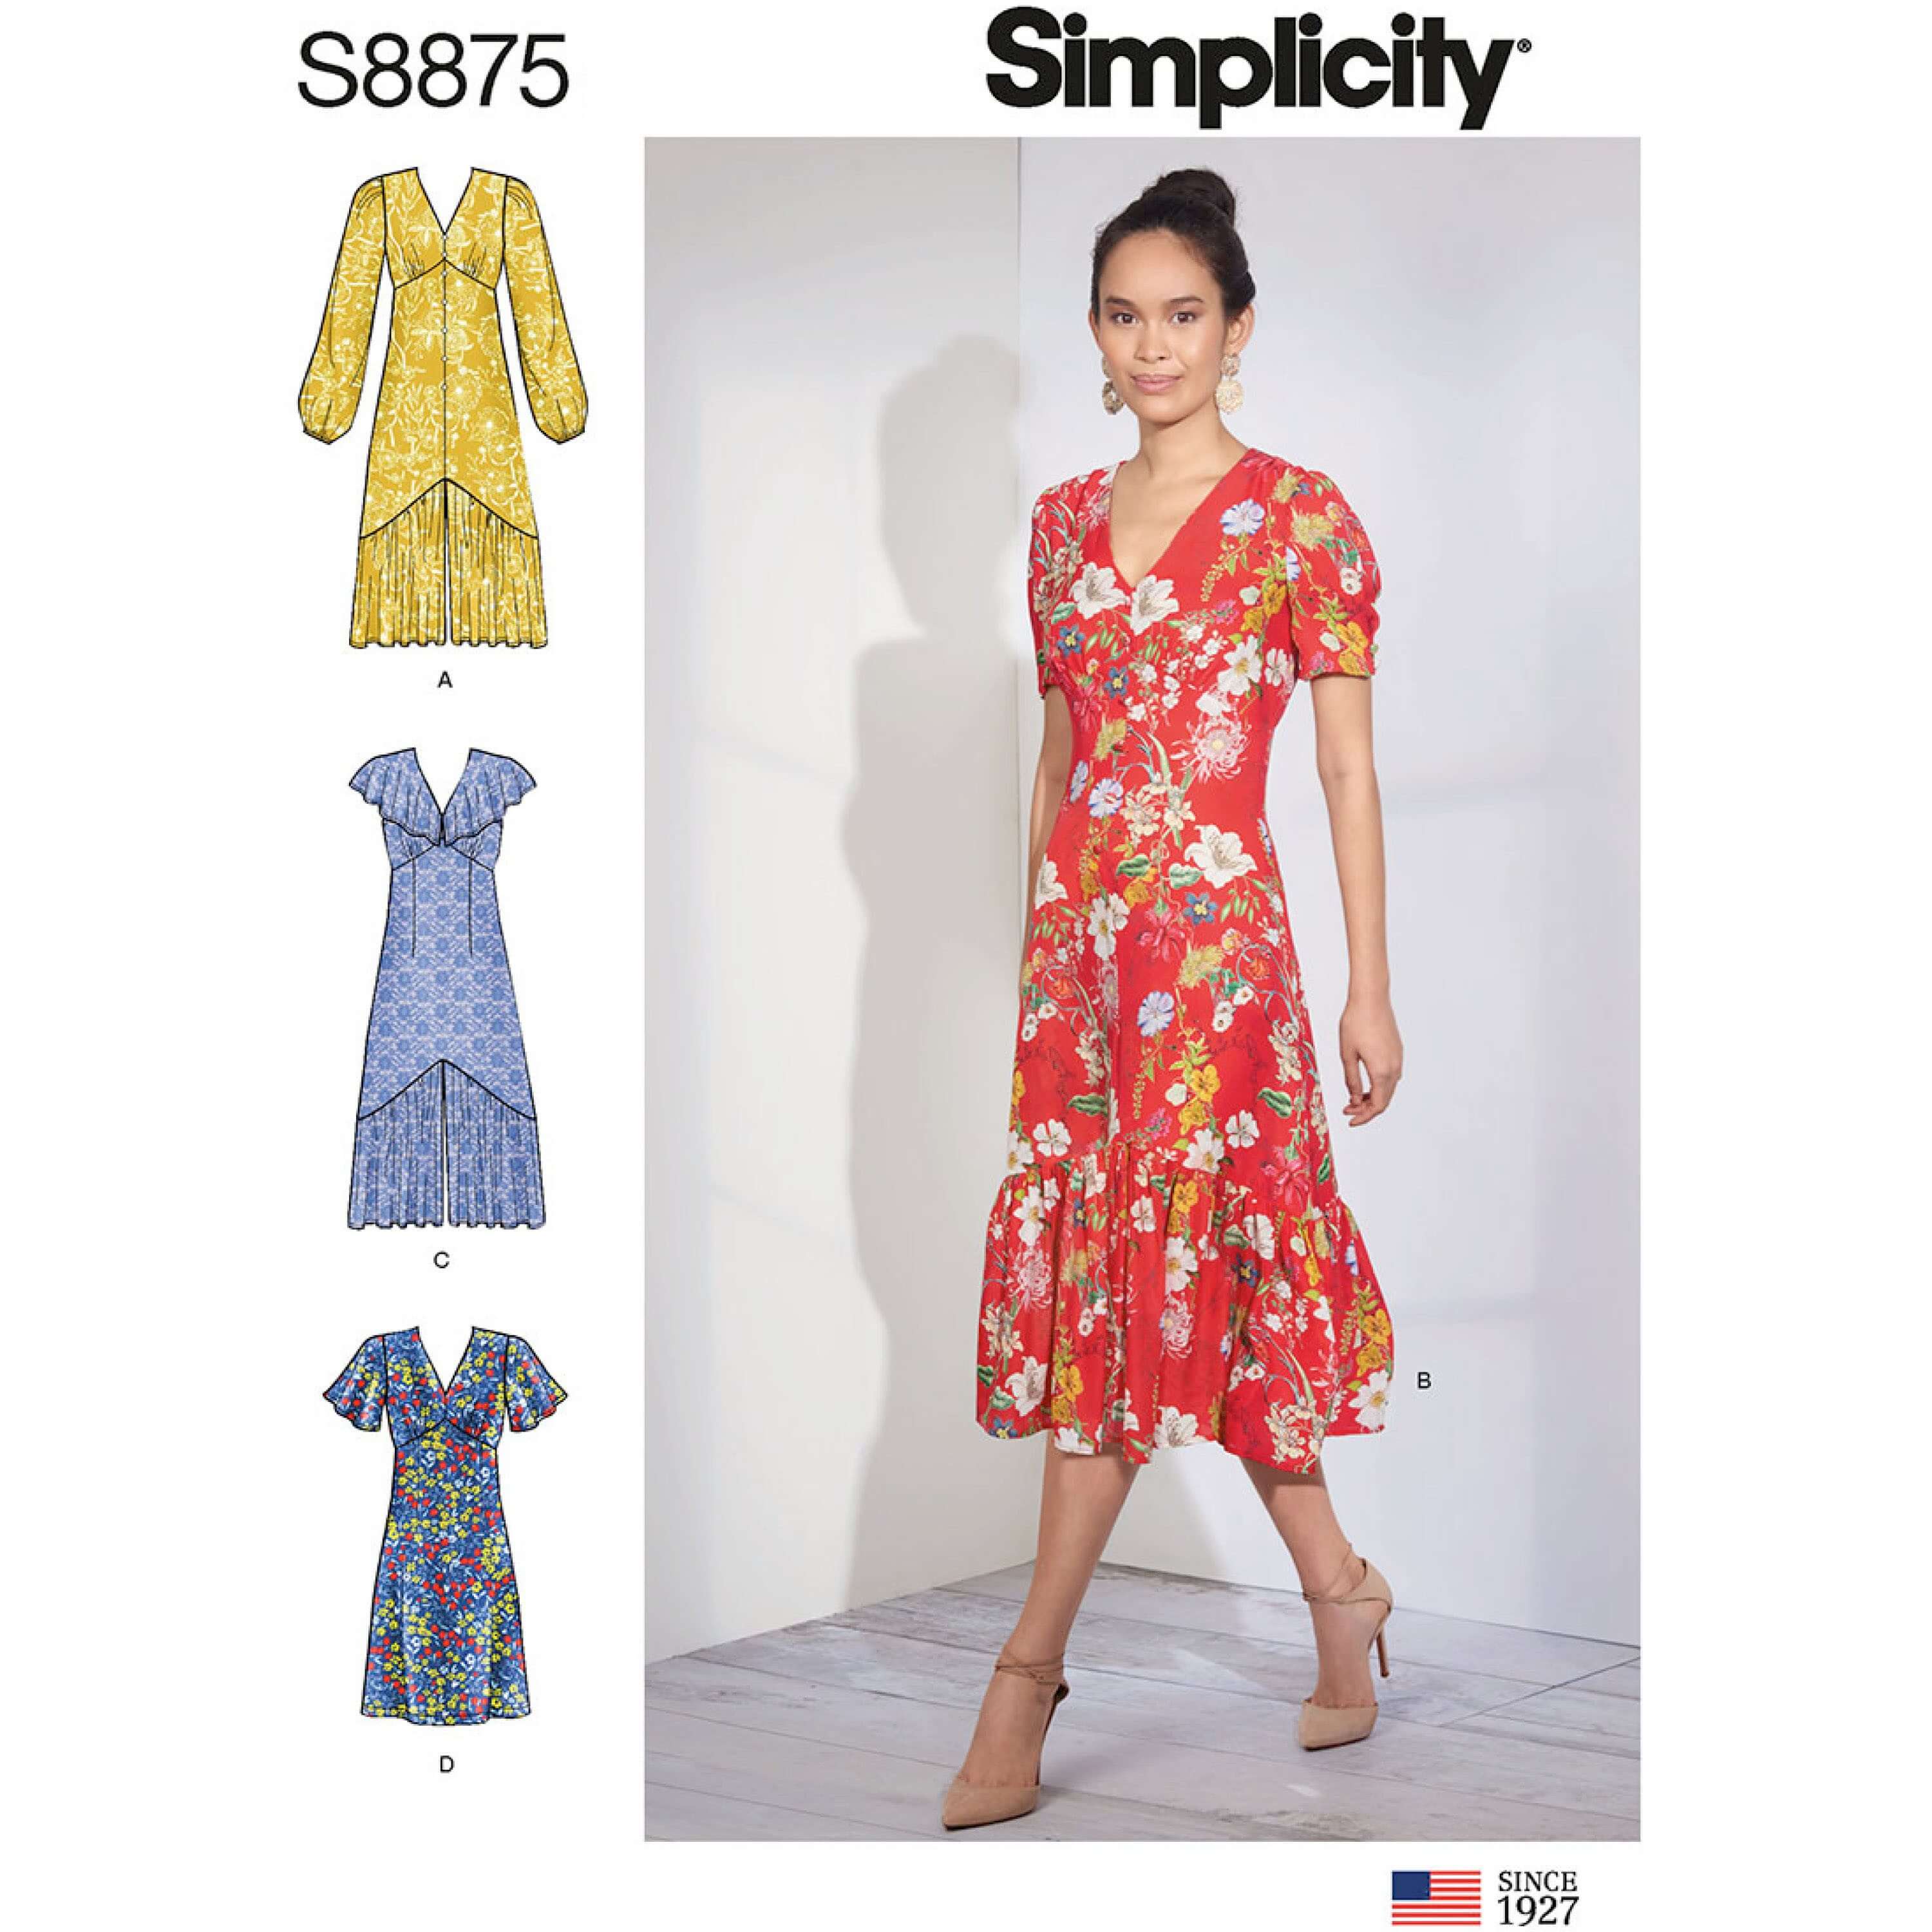 Simplicity Sewing Pattern 8875 Misses Empire Waist Summer Dresses